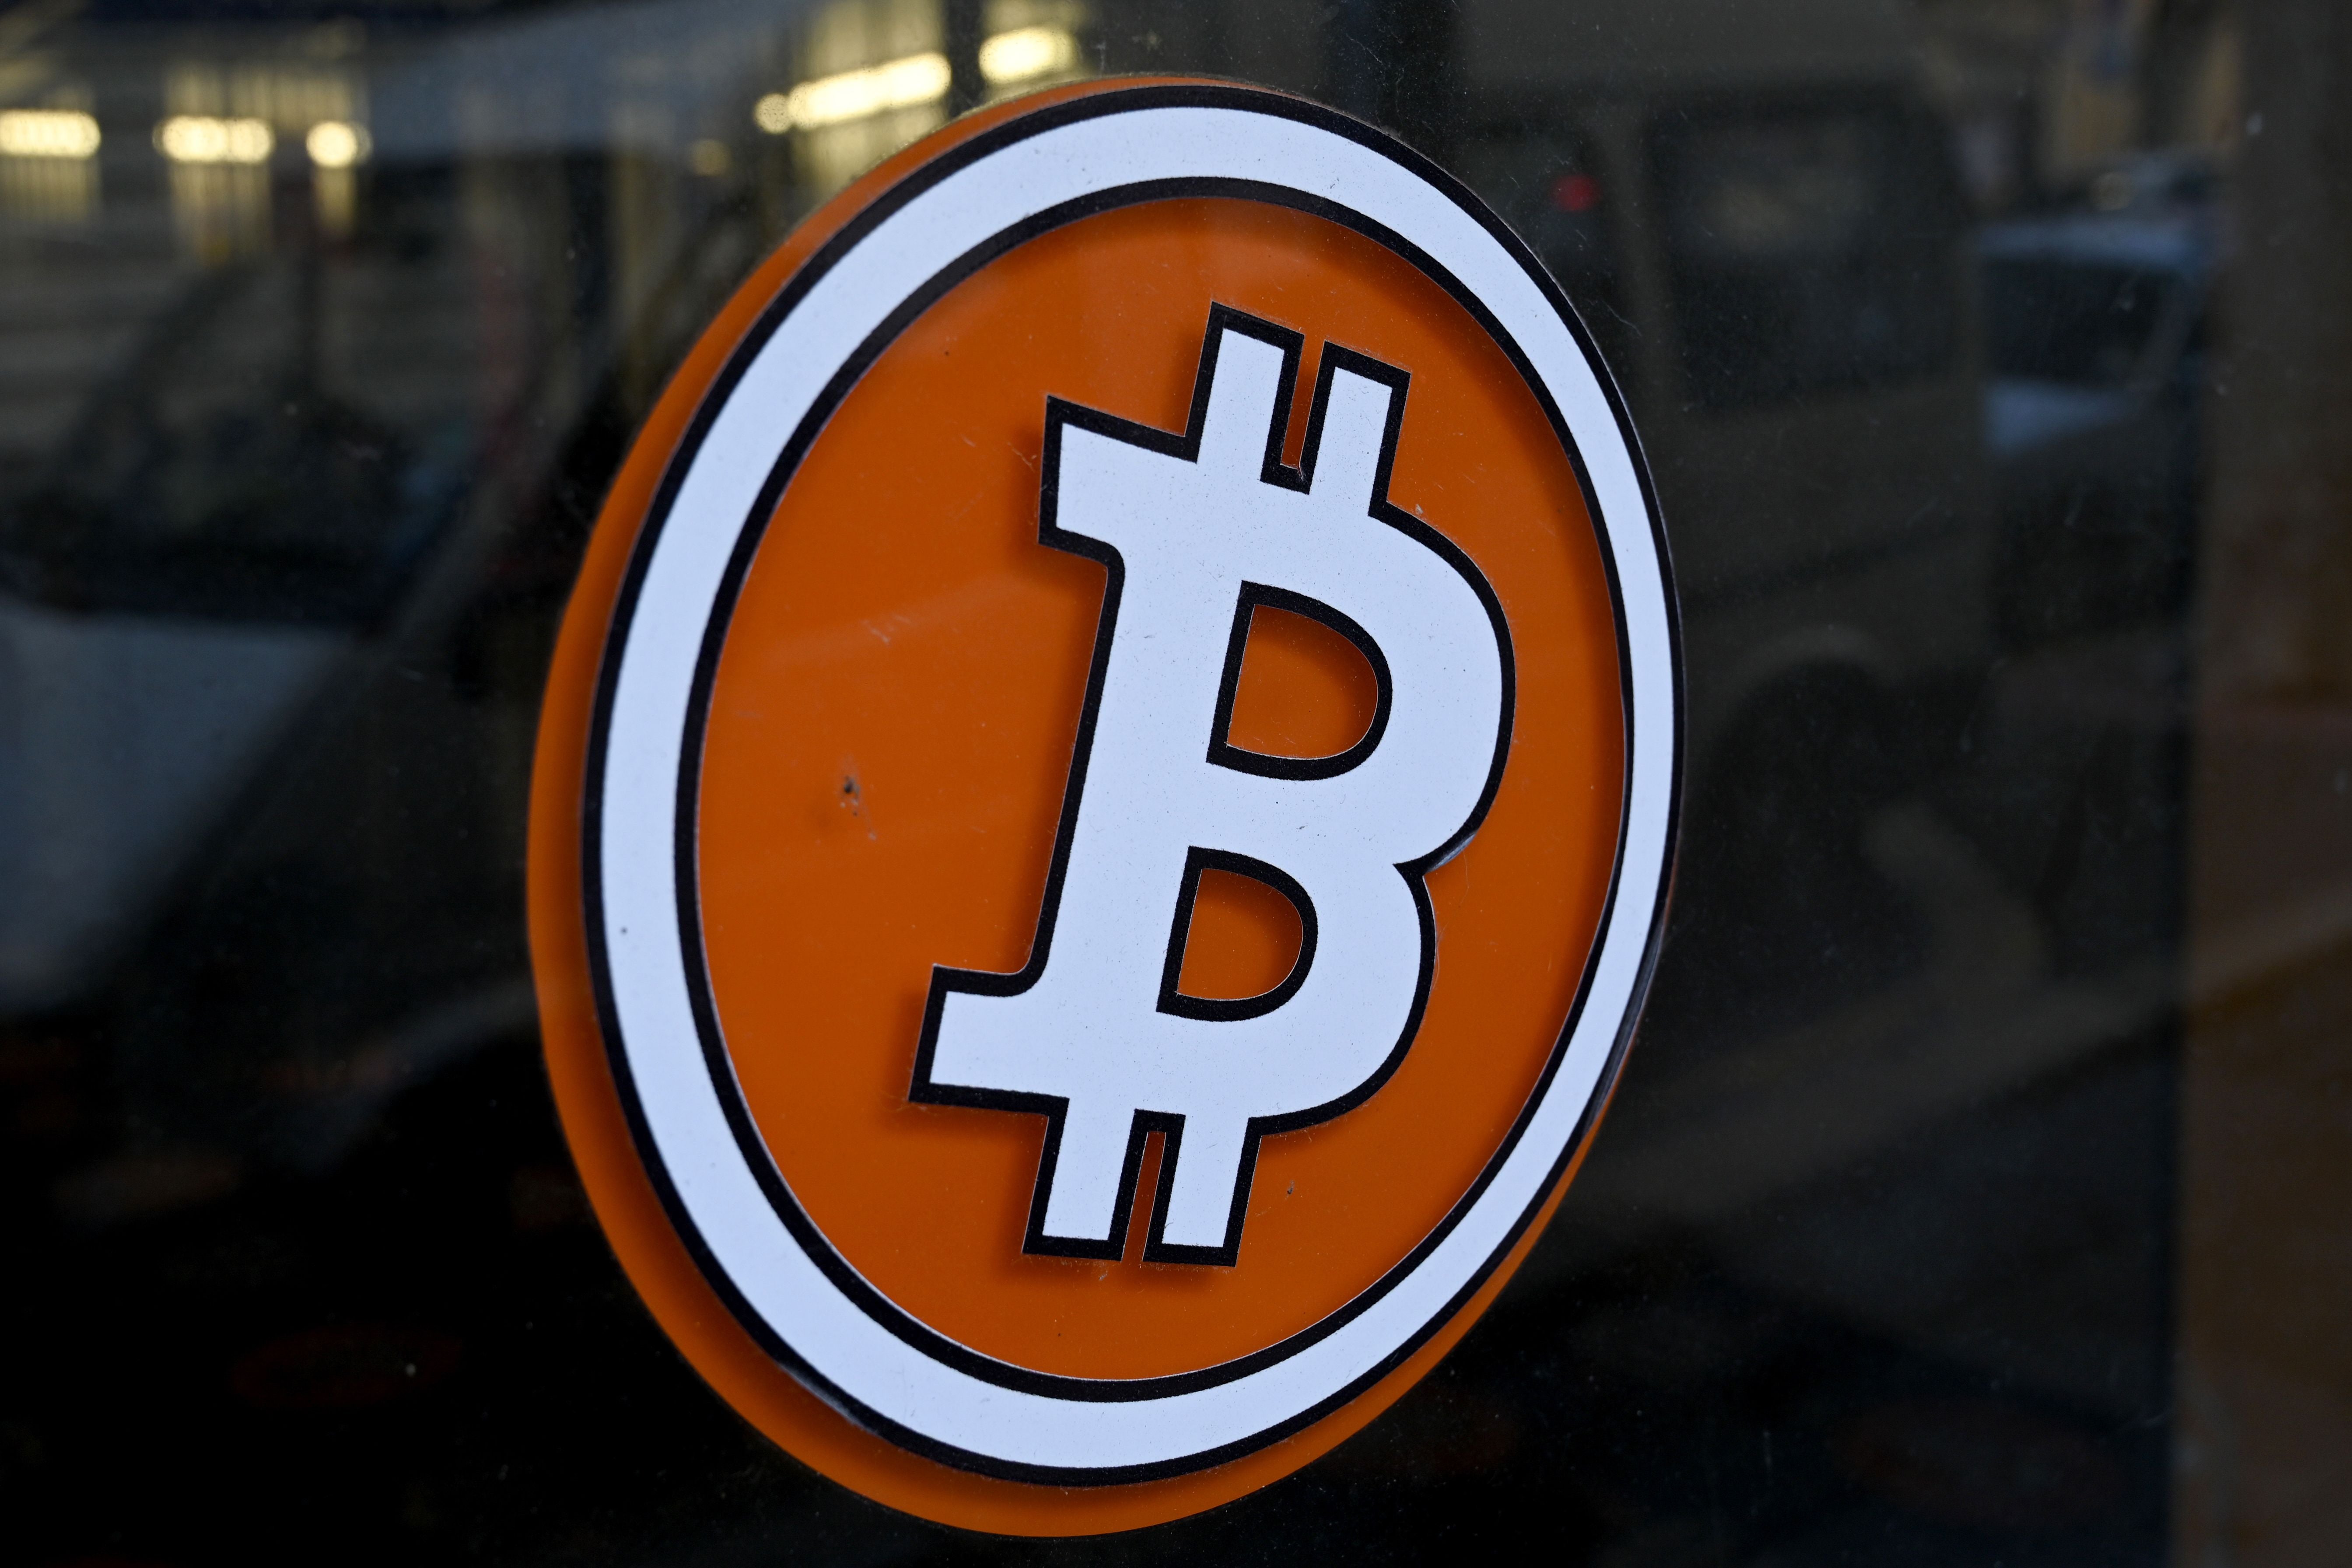 The logo of Bitcoin digital currency is pictured on the front door of an ATM in Marseille, southern France